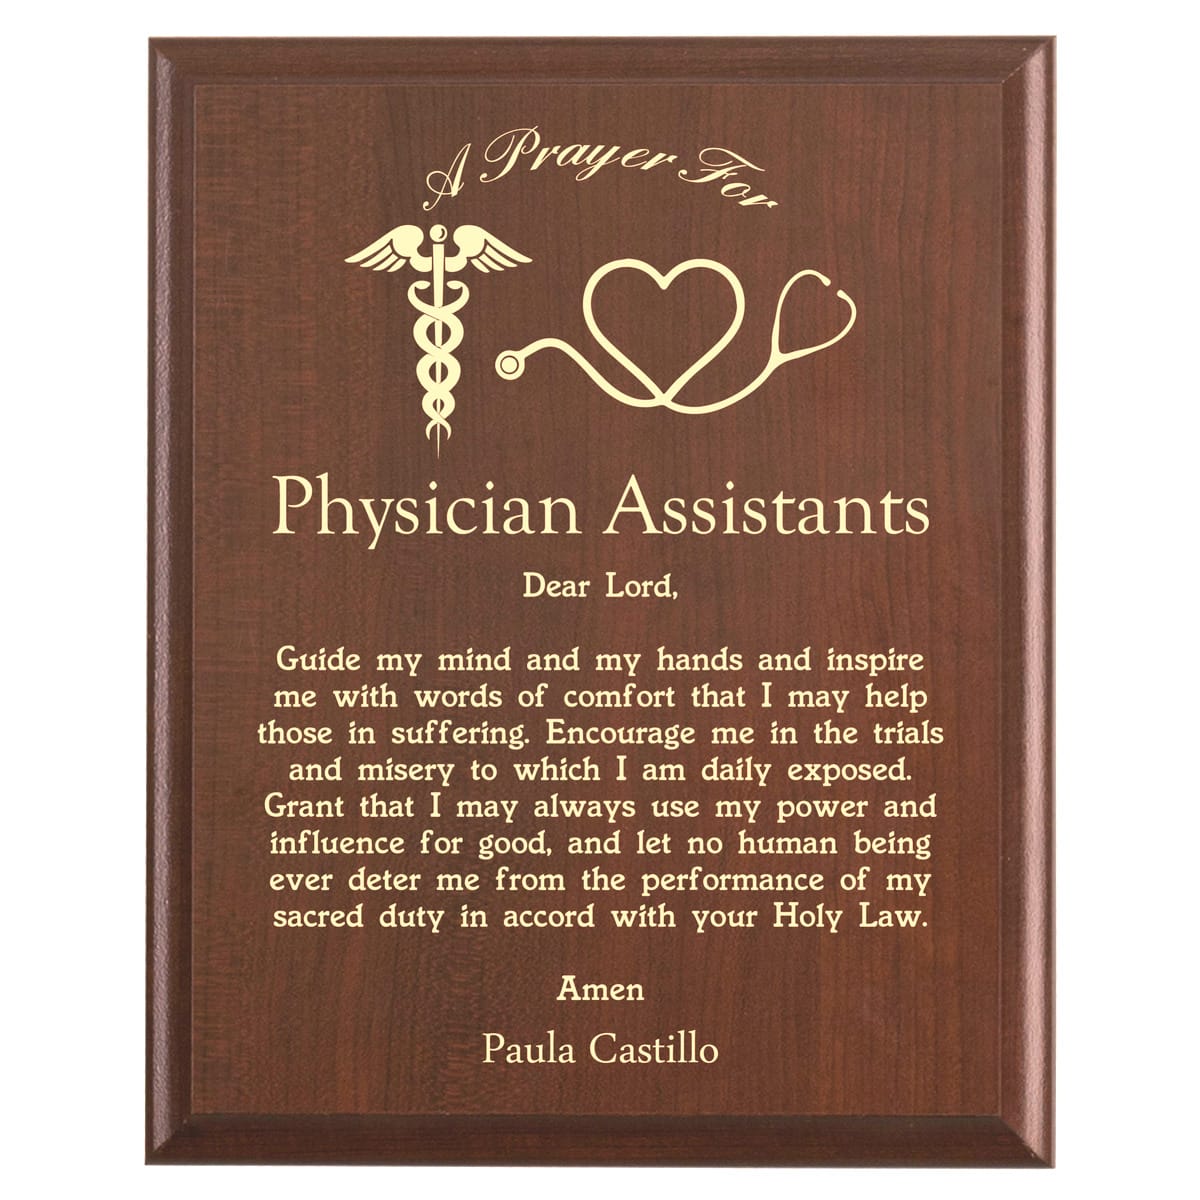 Plaque photo: Physician Assistant Prayer Plaque design with free personalization. Wood style finish with customized text.